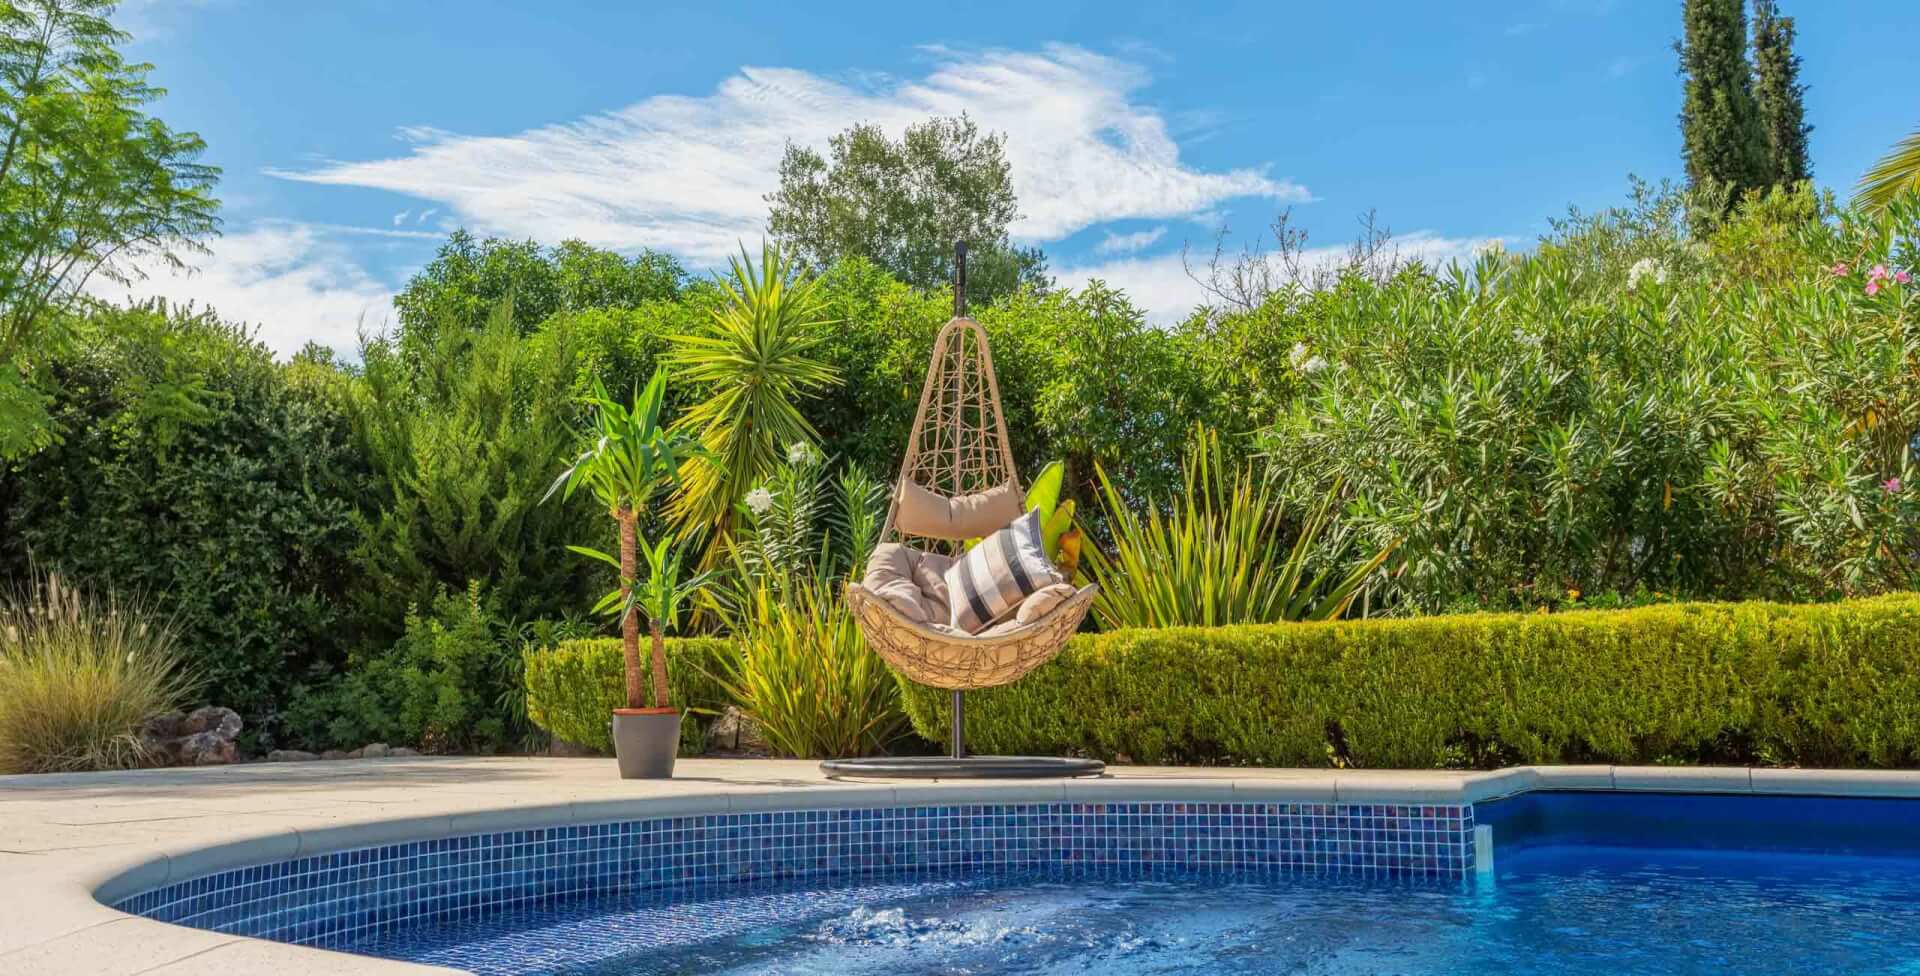 Luxurious pool in the garden of a private villa, hanging chair with pillows, in summer.